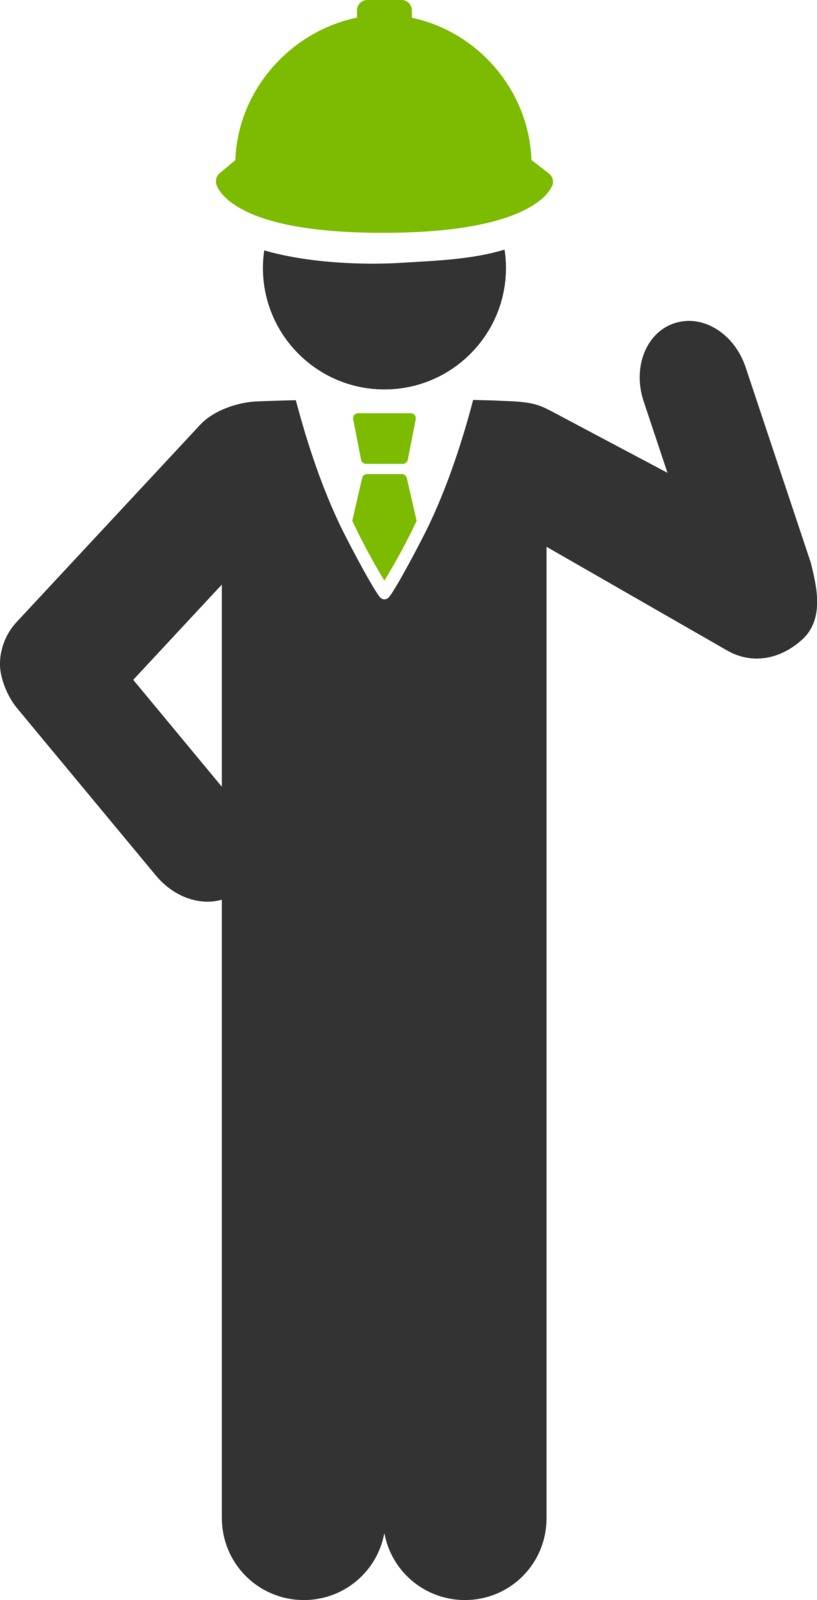 Engineer icon from Business Bicolor Set by ahasoft